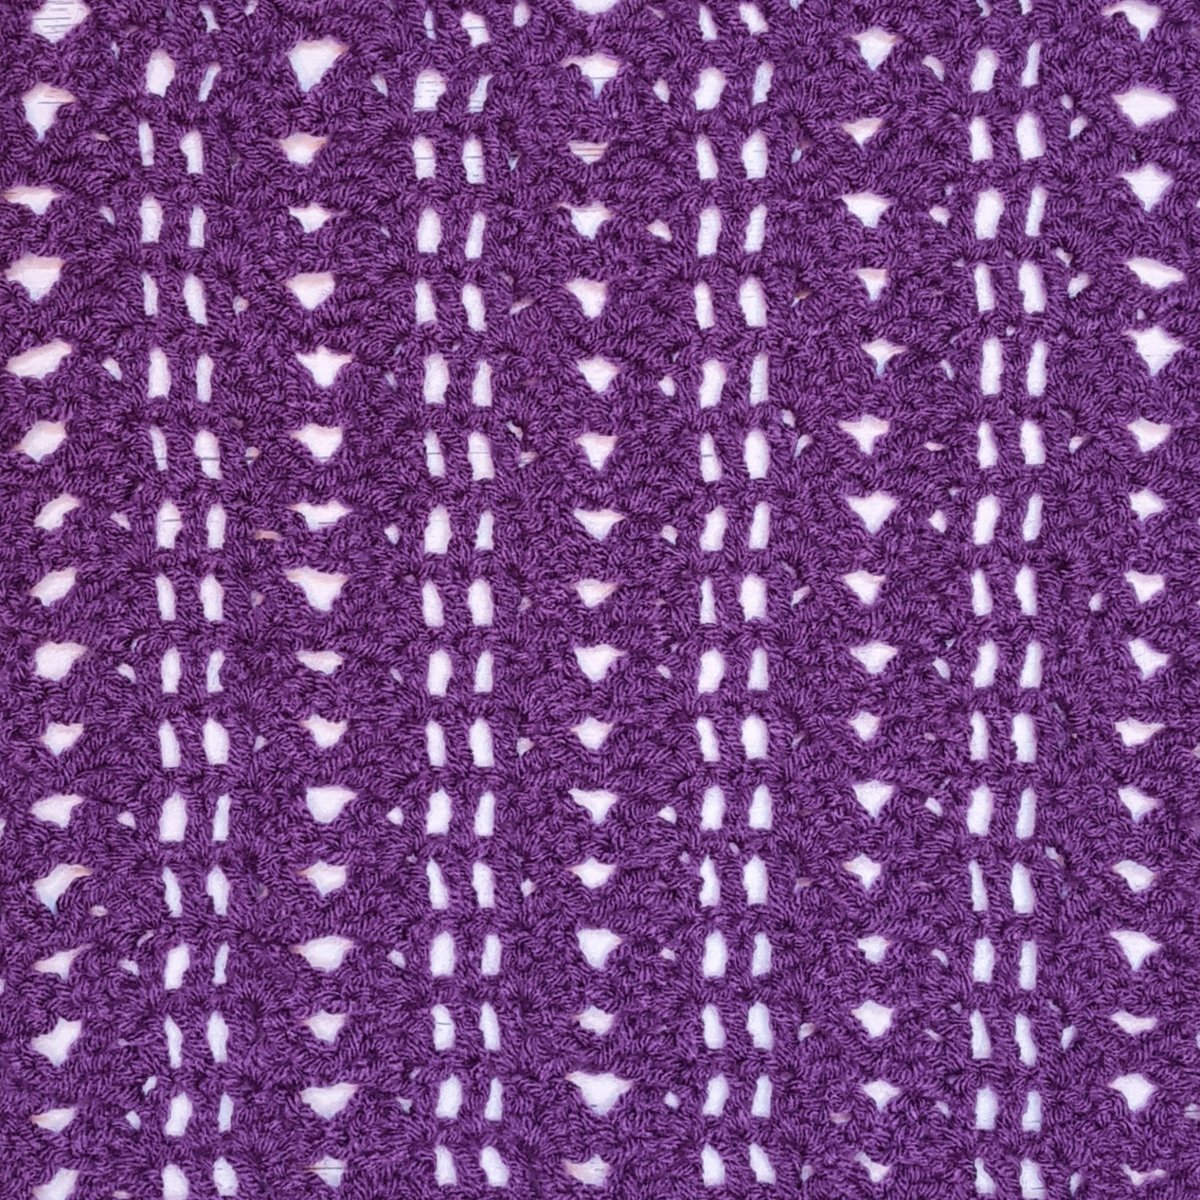 Reflection Granny Square - Part 12 - Secret Stitches CAL 2021 - Easy to Follow Written Crochet Pattern - The Secret Yarnery